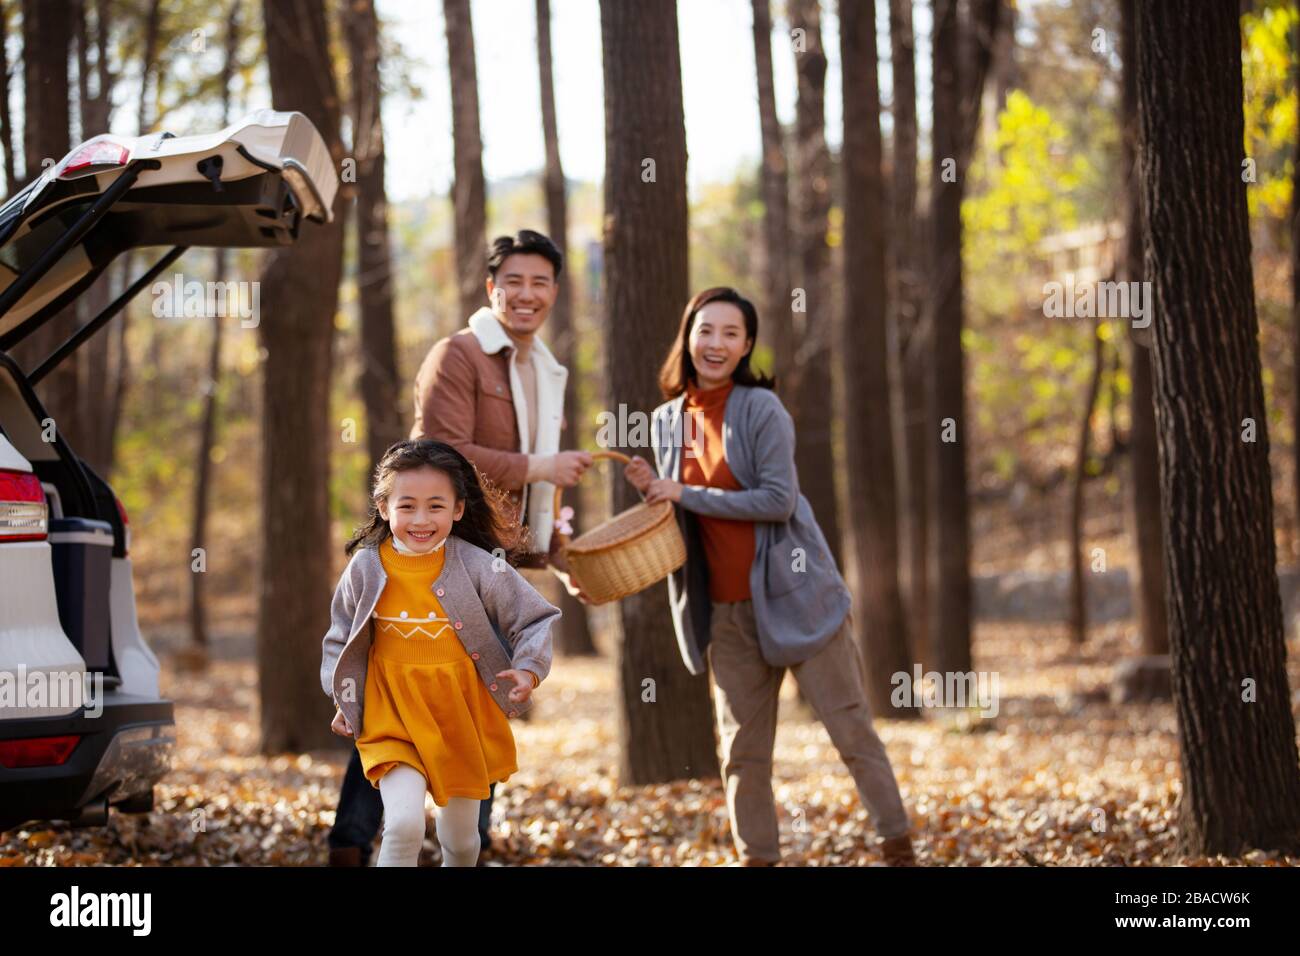 Happy family outdoor outing Stock Photo